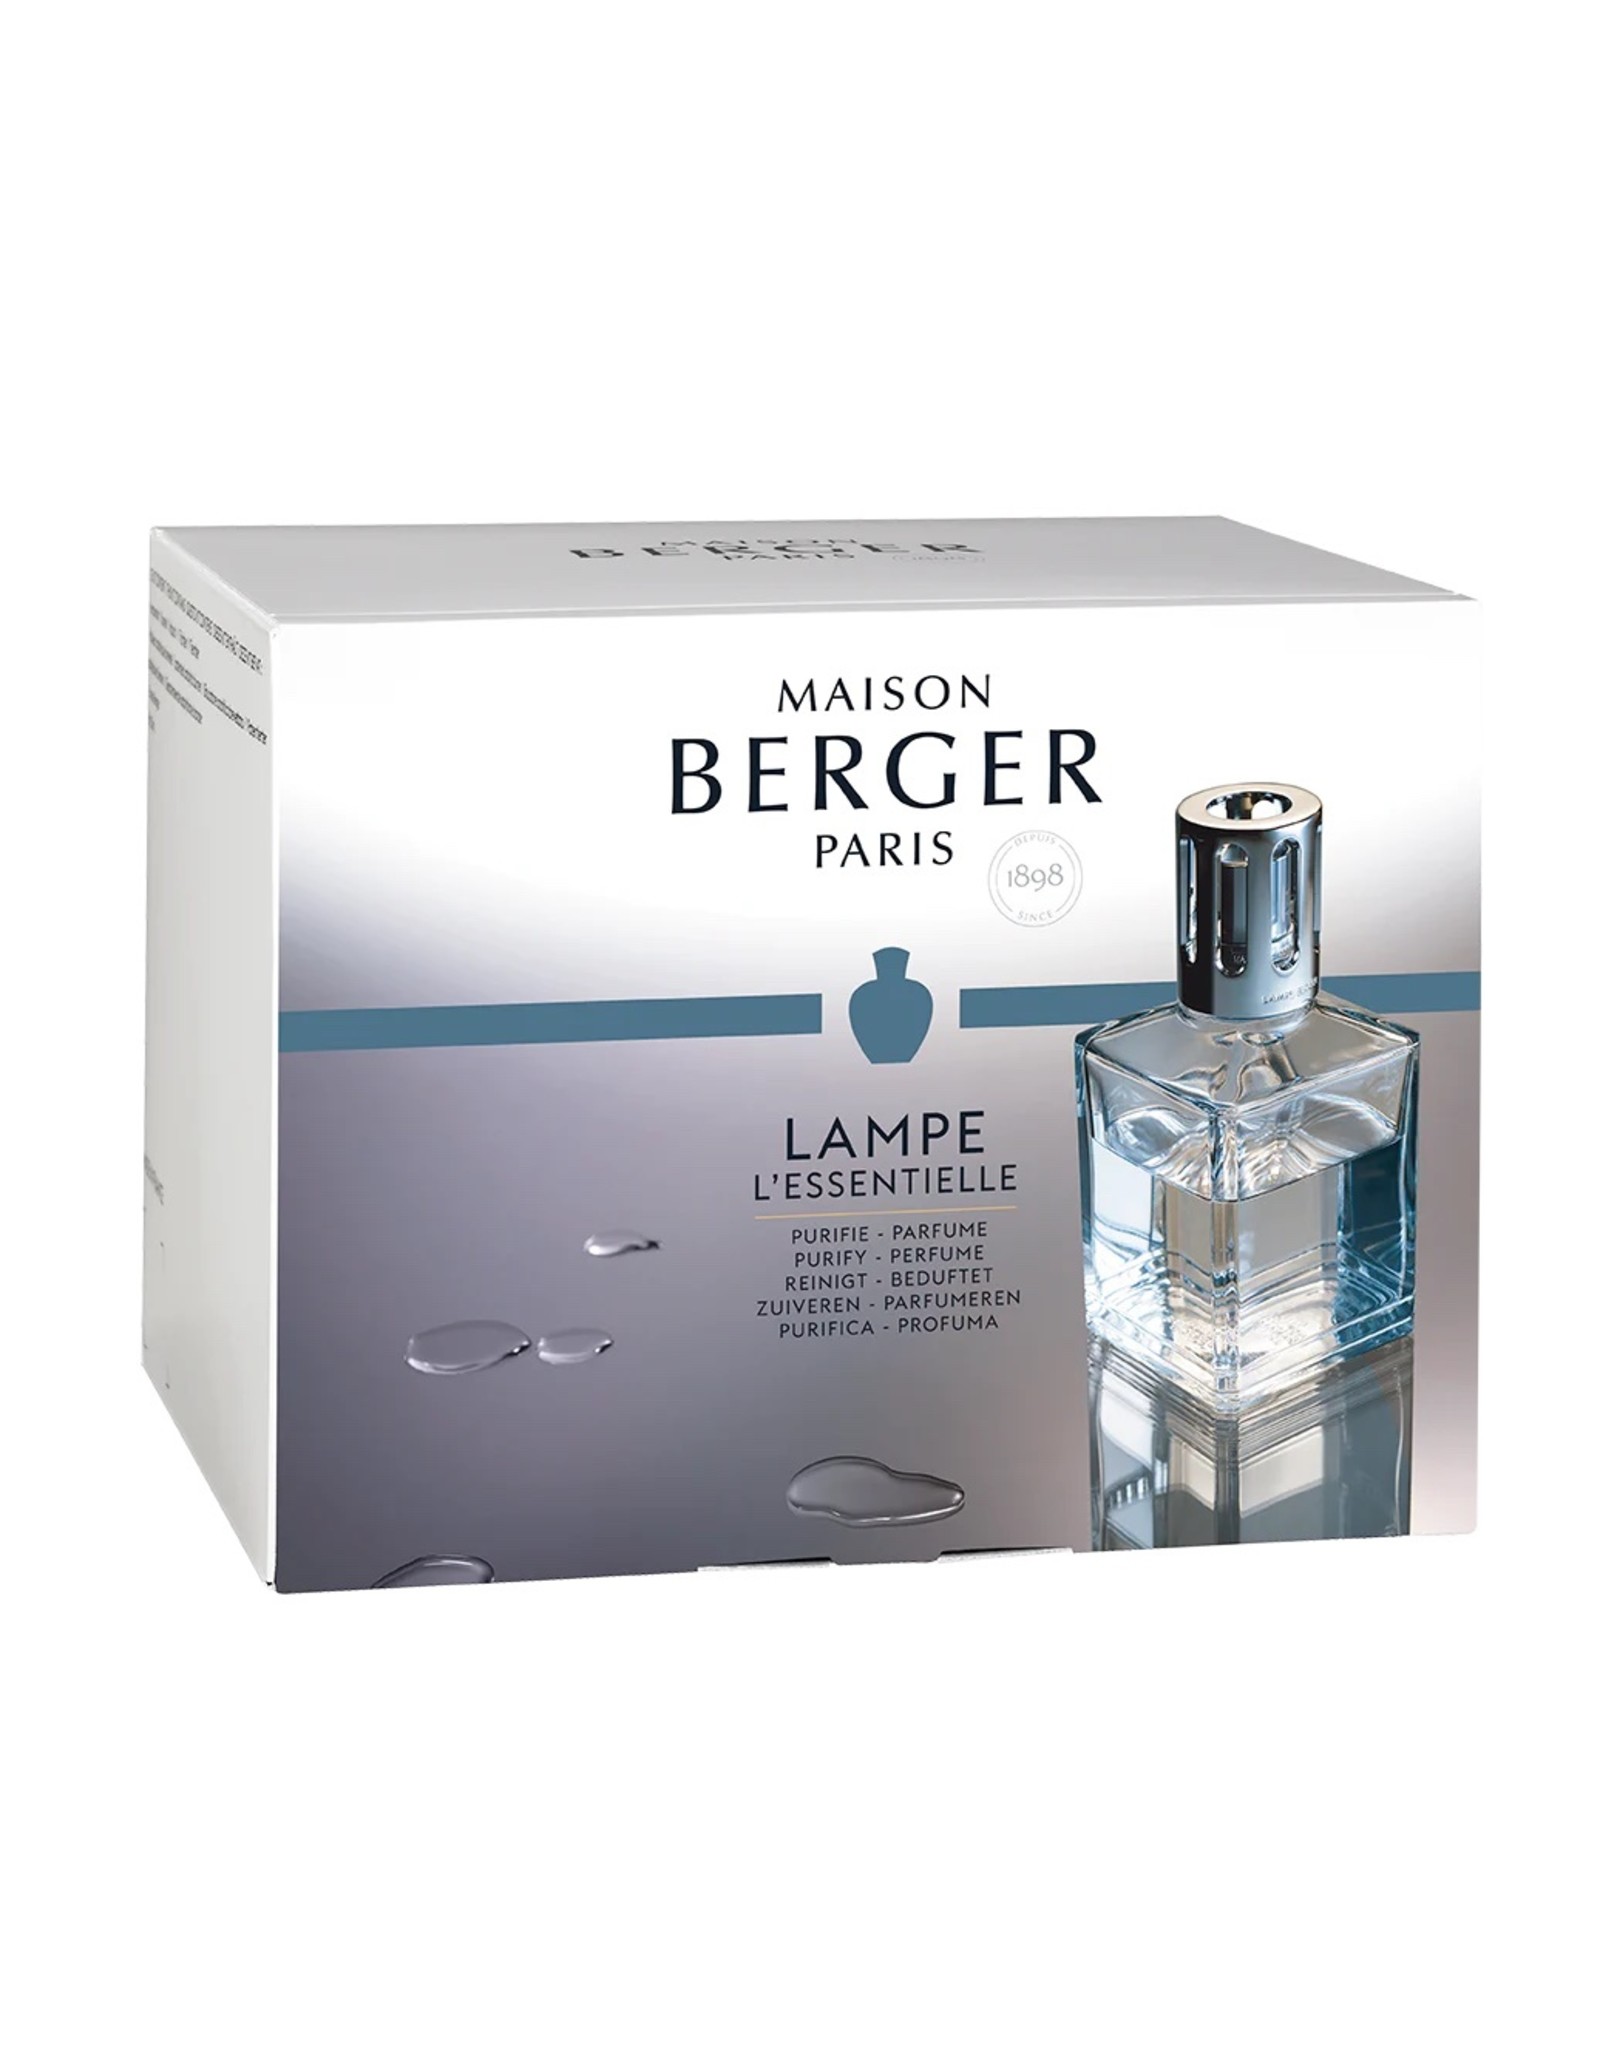 Maison Berger Lampe Berger Aroma Gift Set Essential Lamp Purify Fragrance  New